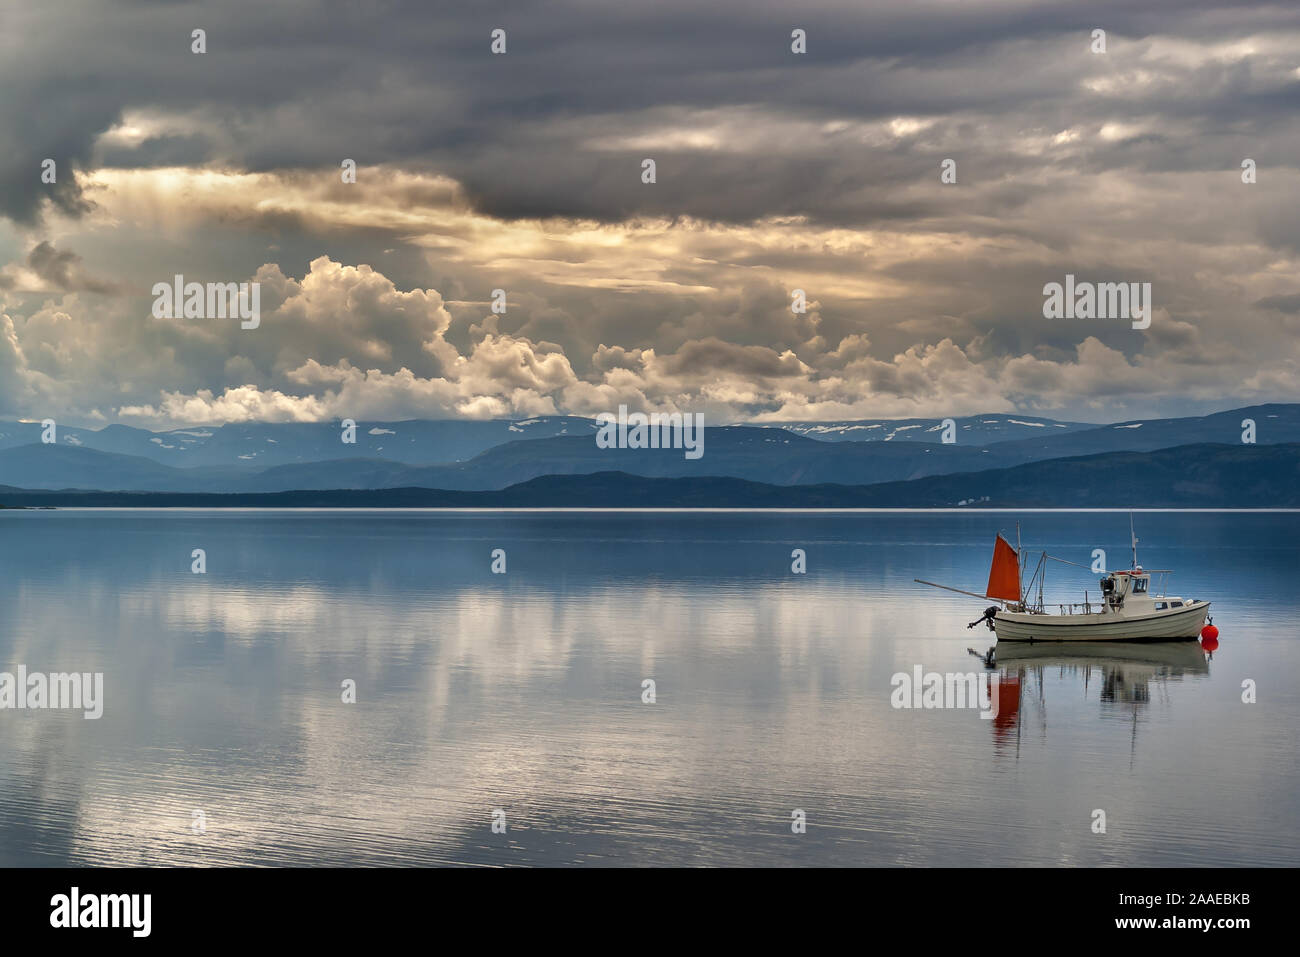 A summer landscape of the Barents Sea near the Norwegian coast (Porsanger Fjord) with a fishing boat in calm sea water, cloudy sky and mountains. Stock Photo